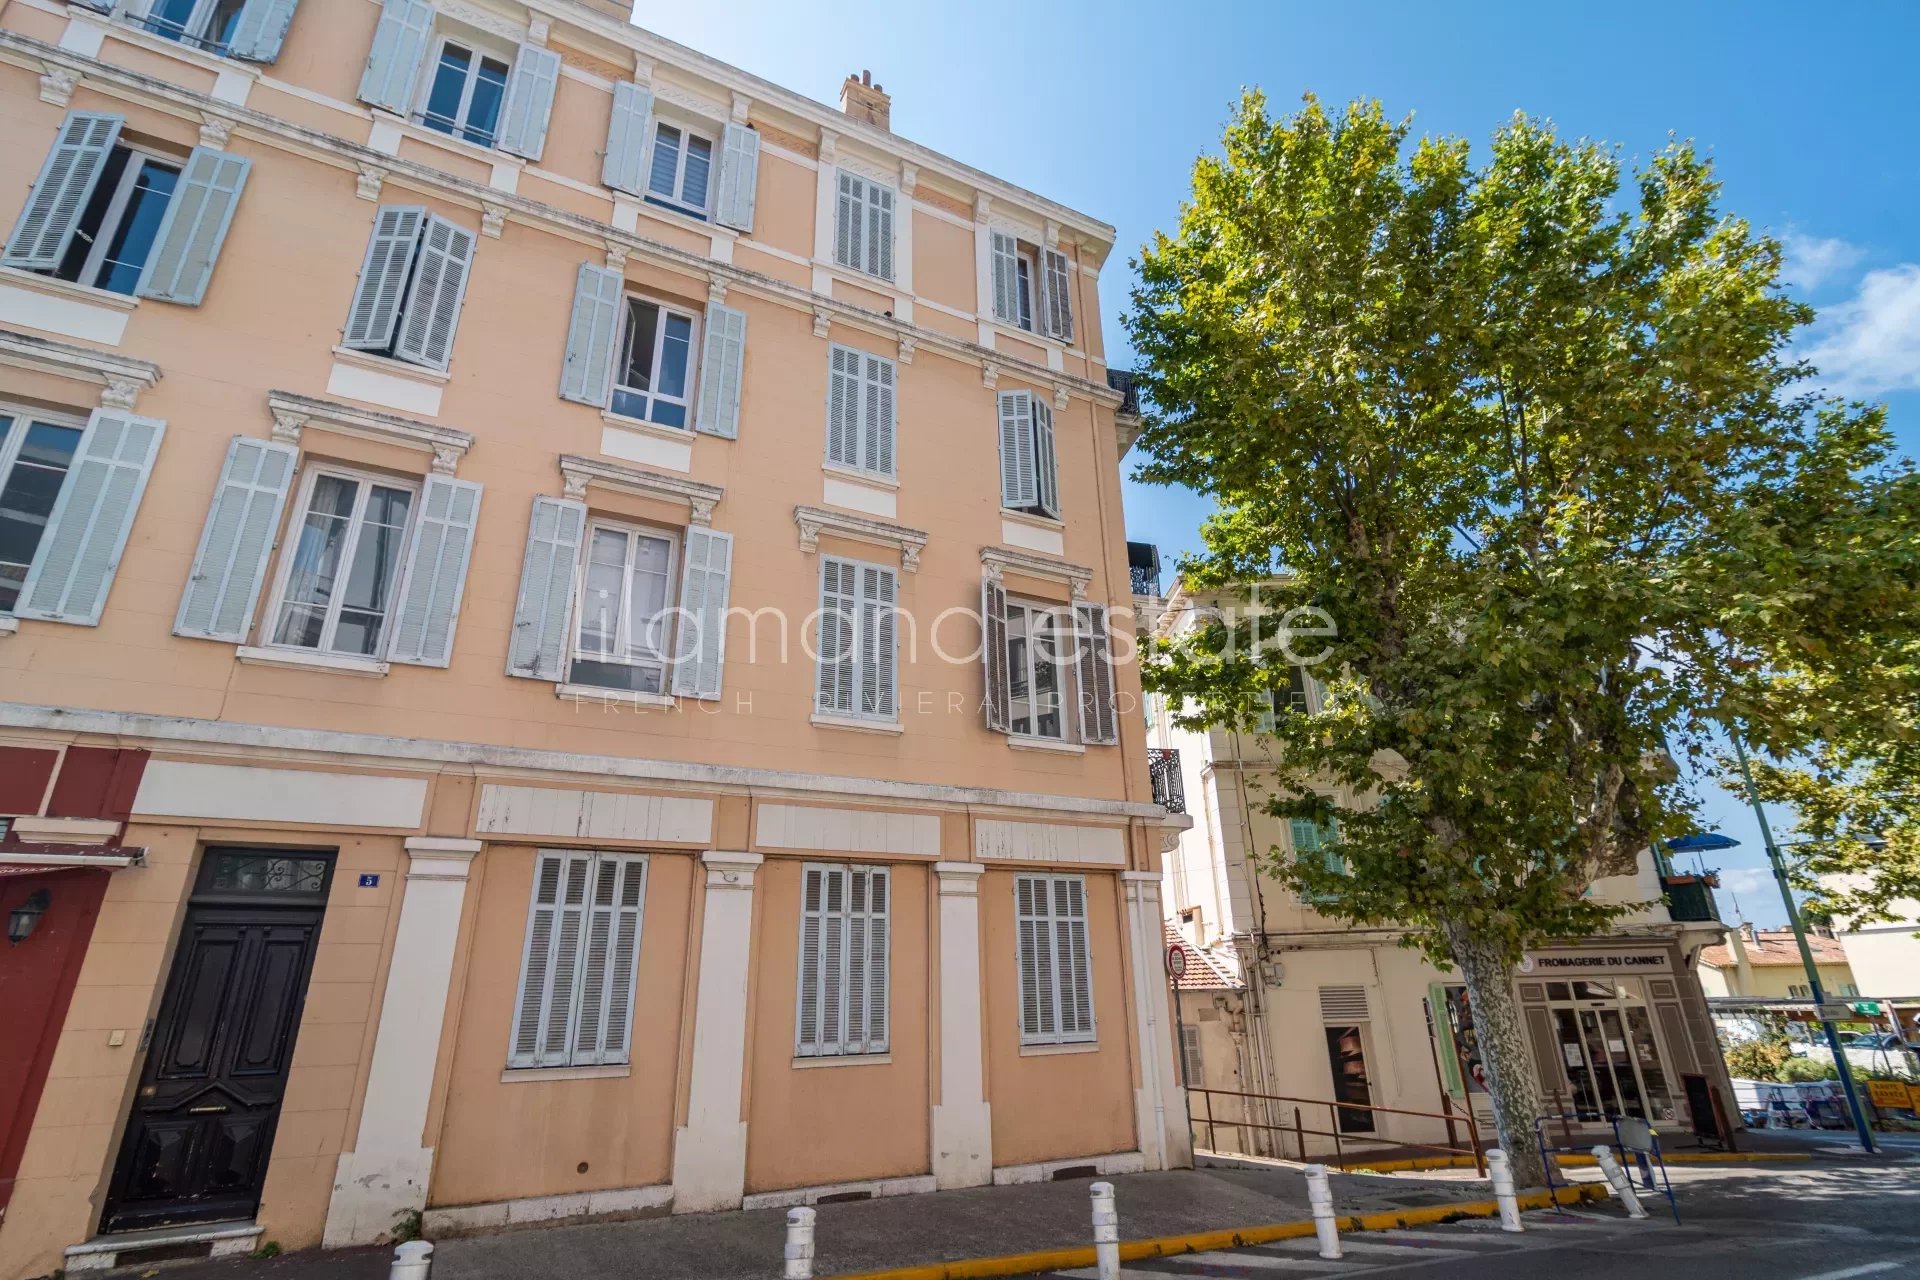 7276630-EXCLUSIVITE - LE CANNET MAIRIE - 4P - BOURGEOIS